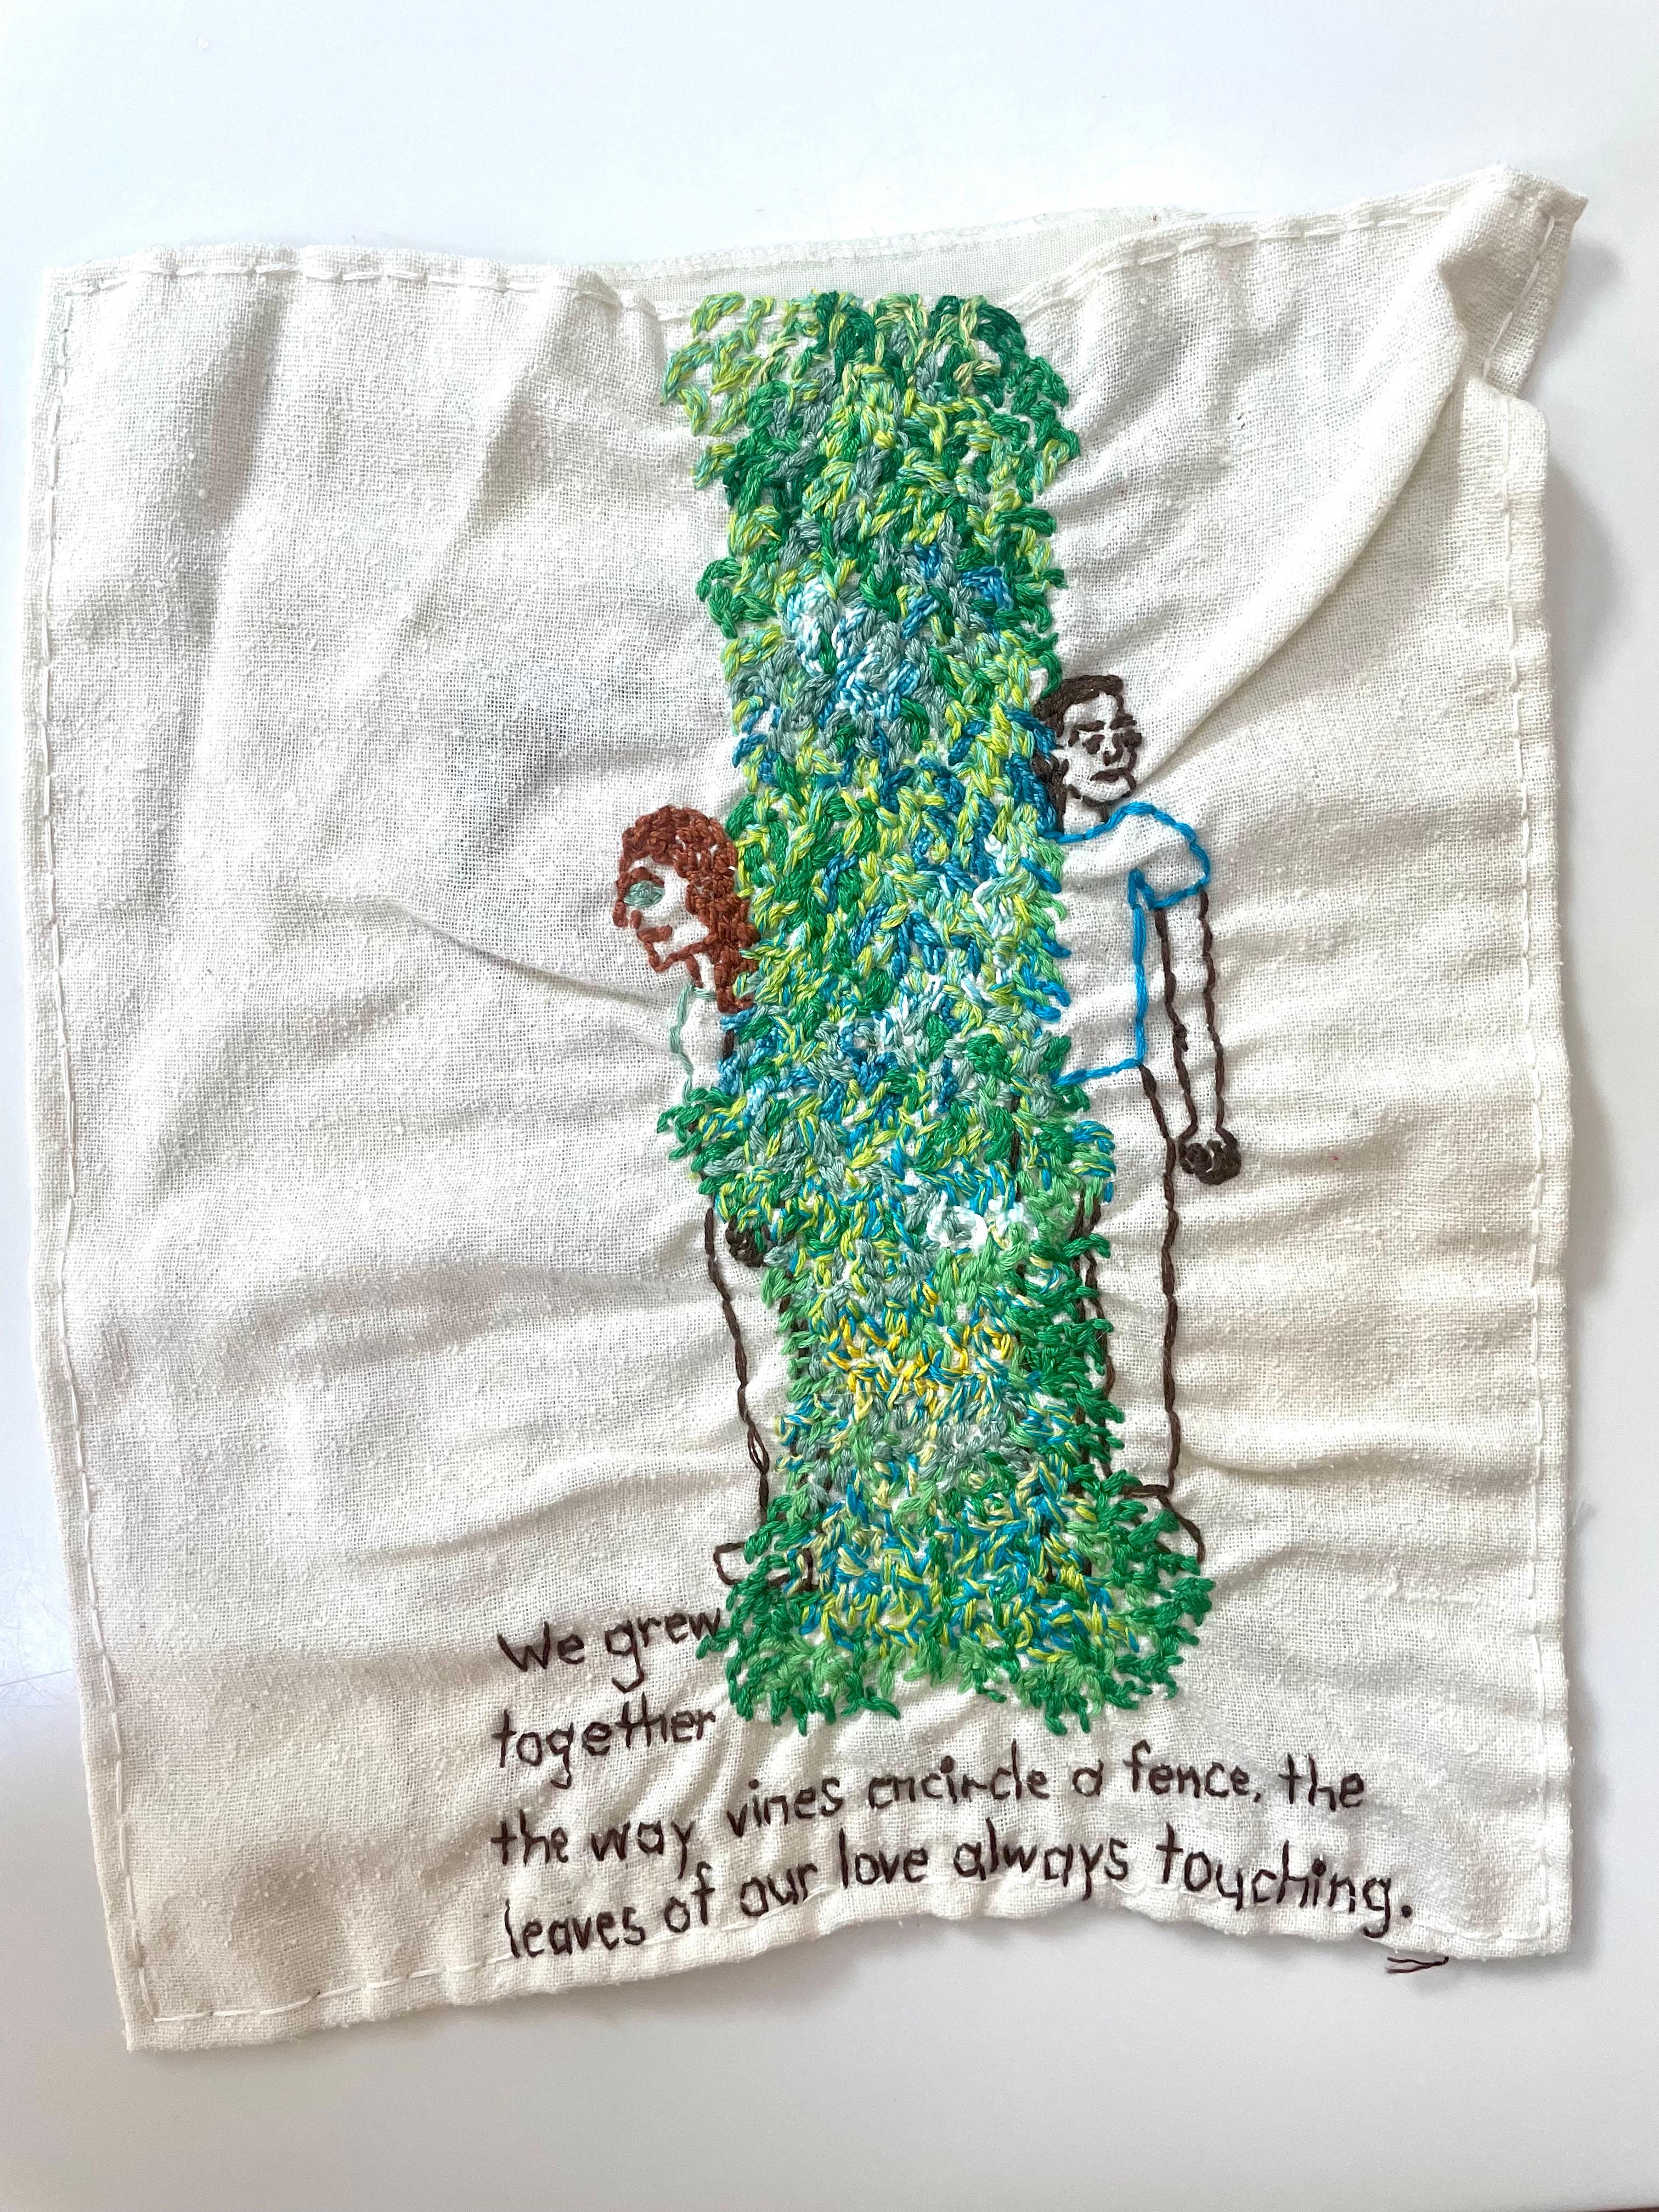 We grew together- narrative embroidered fabric with love couple and a tree - Mixed Media Art by Iviva Olenick